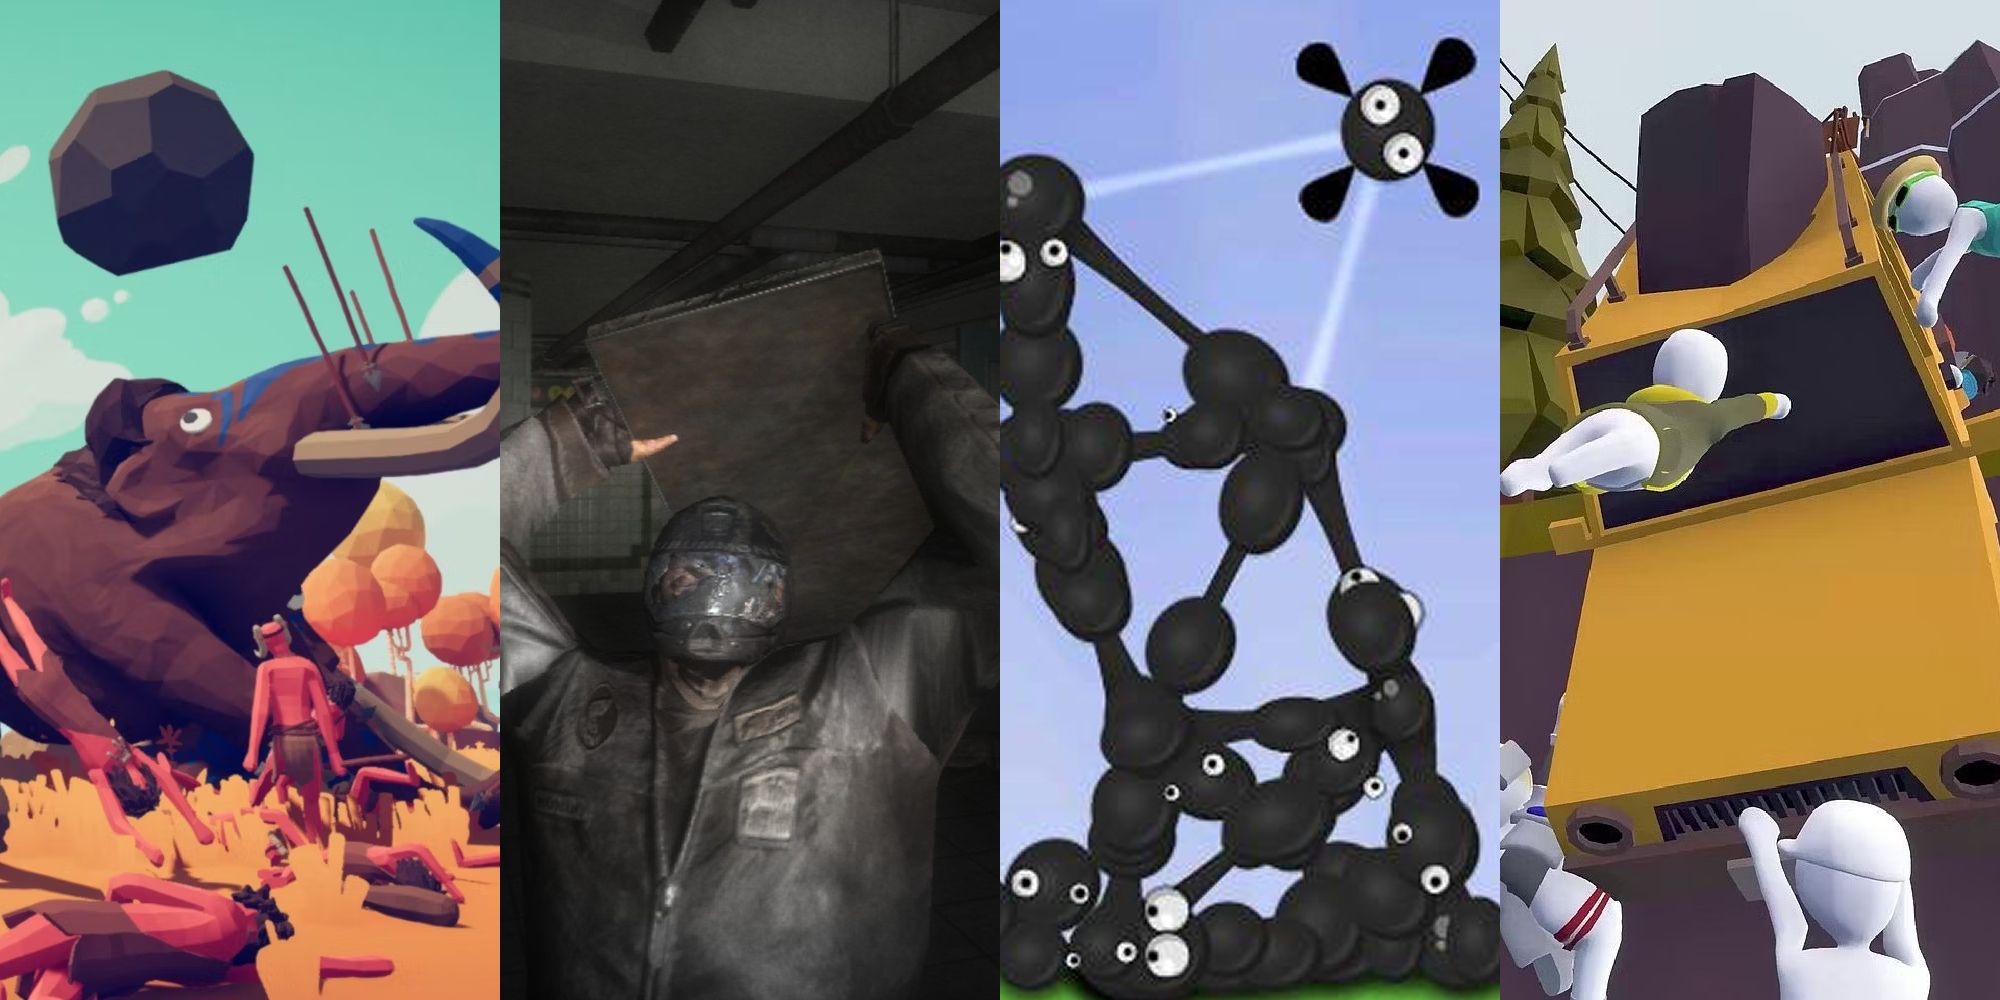 A Split Image Depicting Artwork From World Of Goo, Condemned, Human Fall Flat, And Totally Accurate Battle Simulator